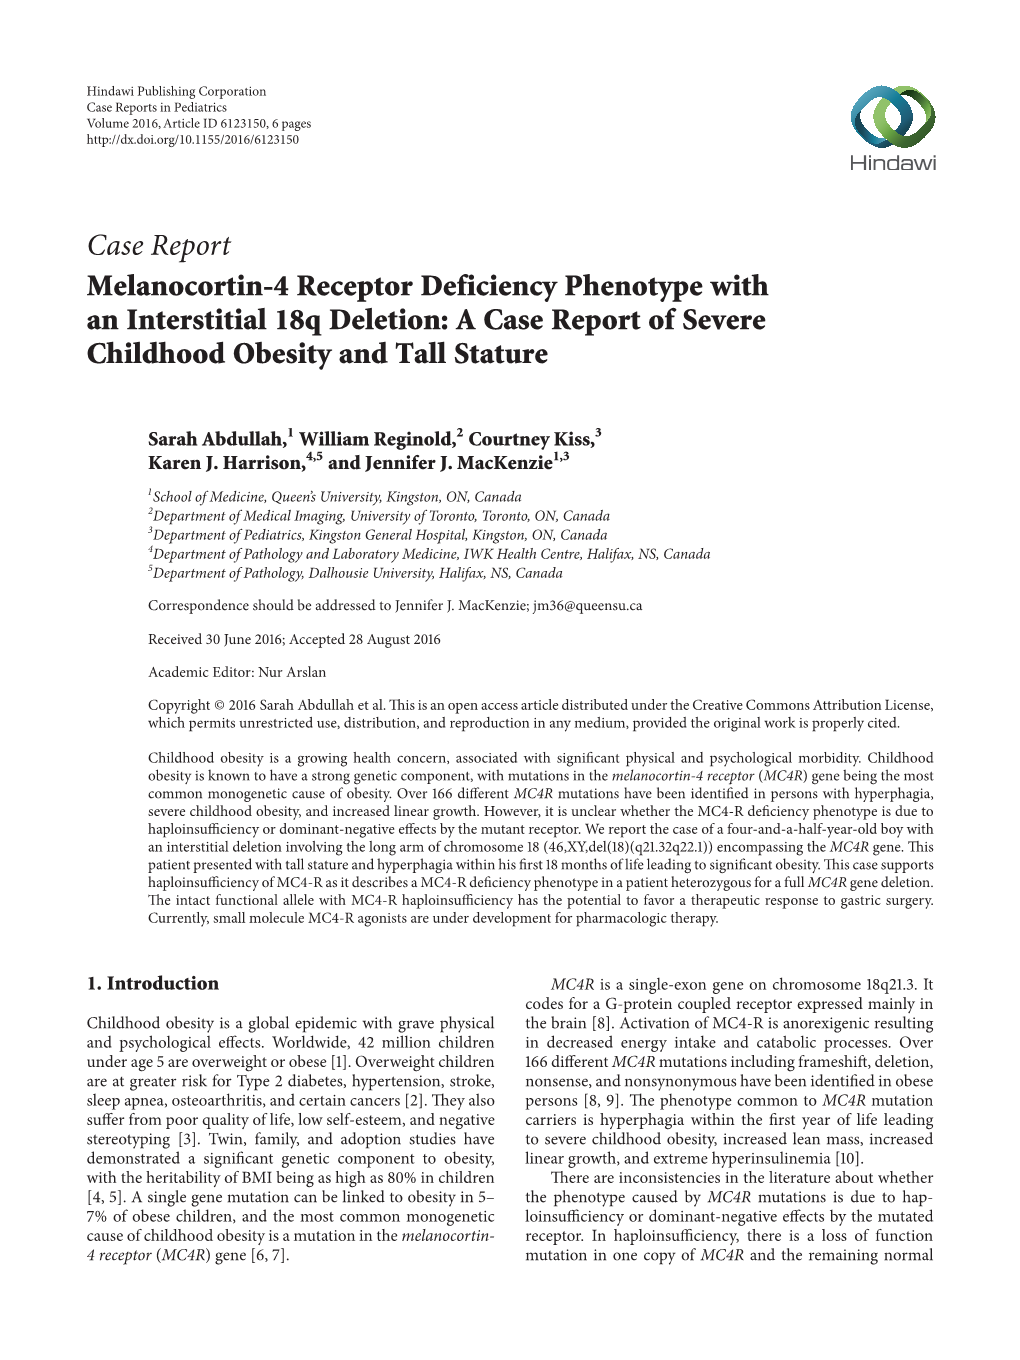 A Case Report of Severe Childhood Obesity and Tall Stature